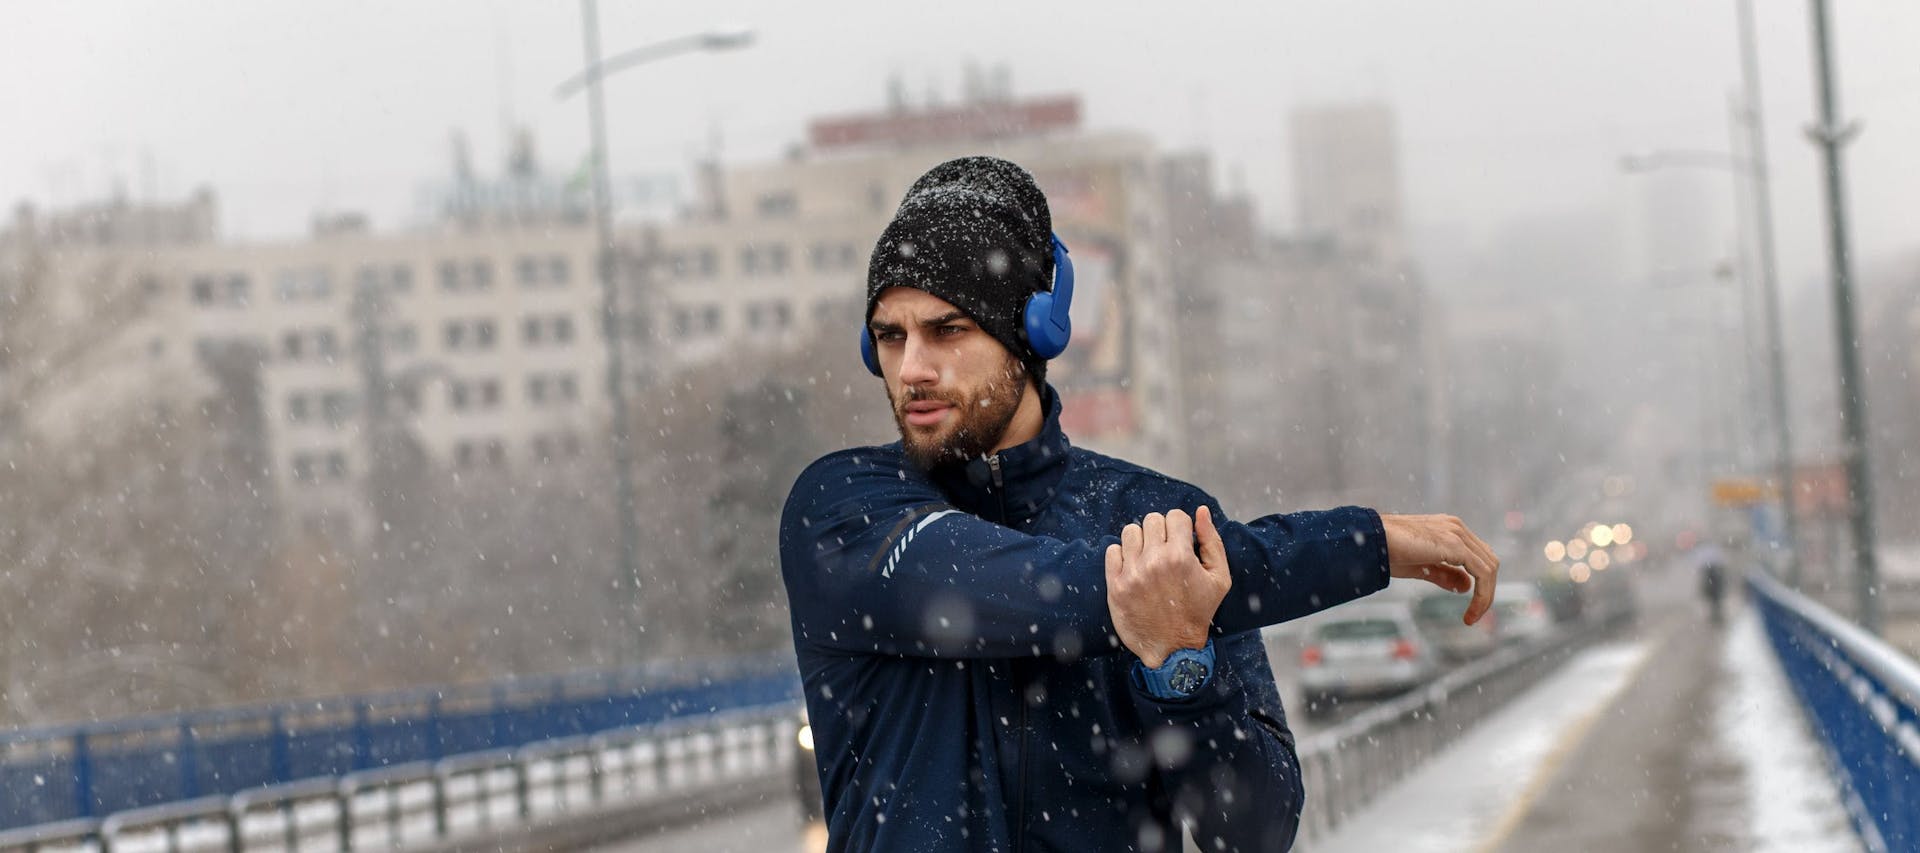 A man exercising outdoors in snow